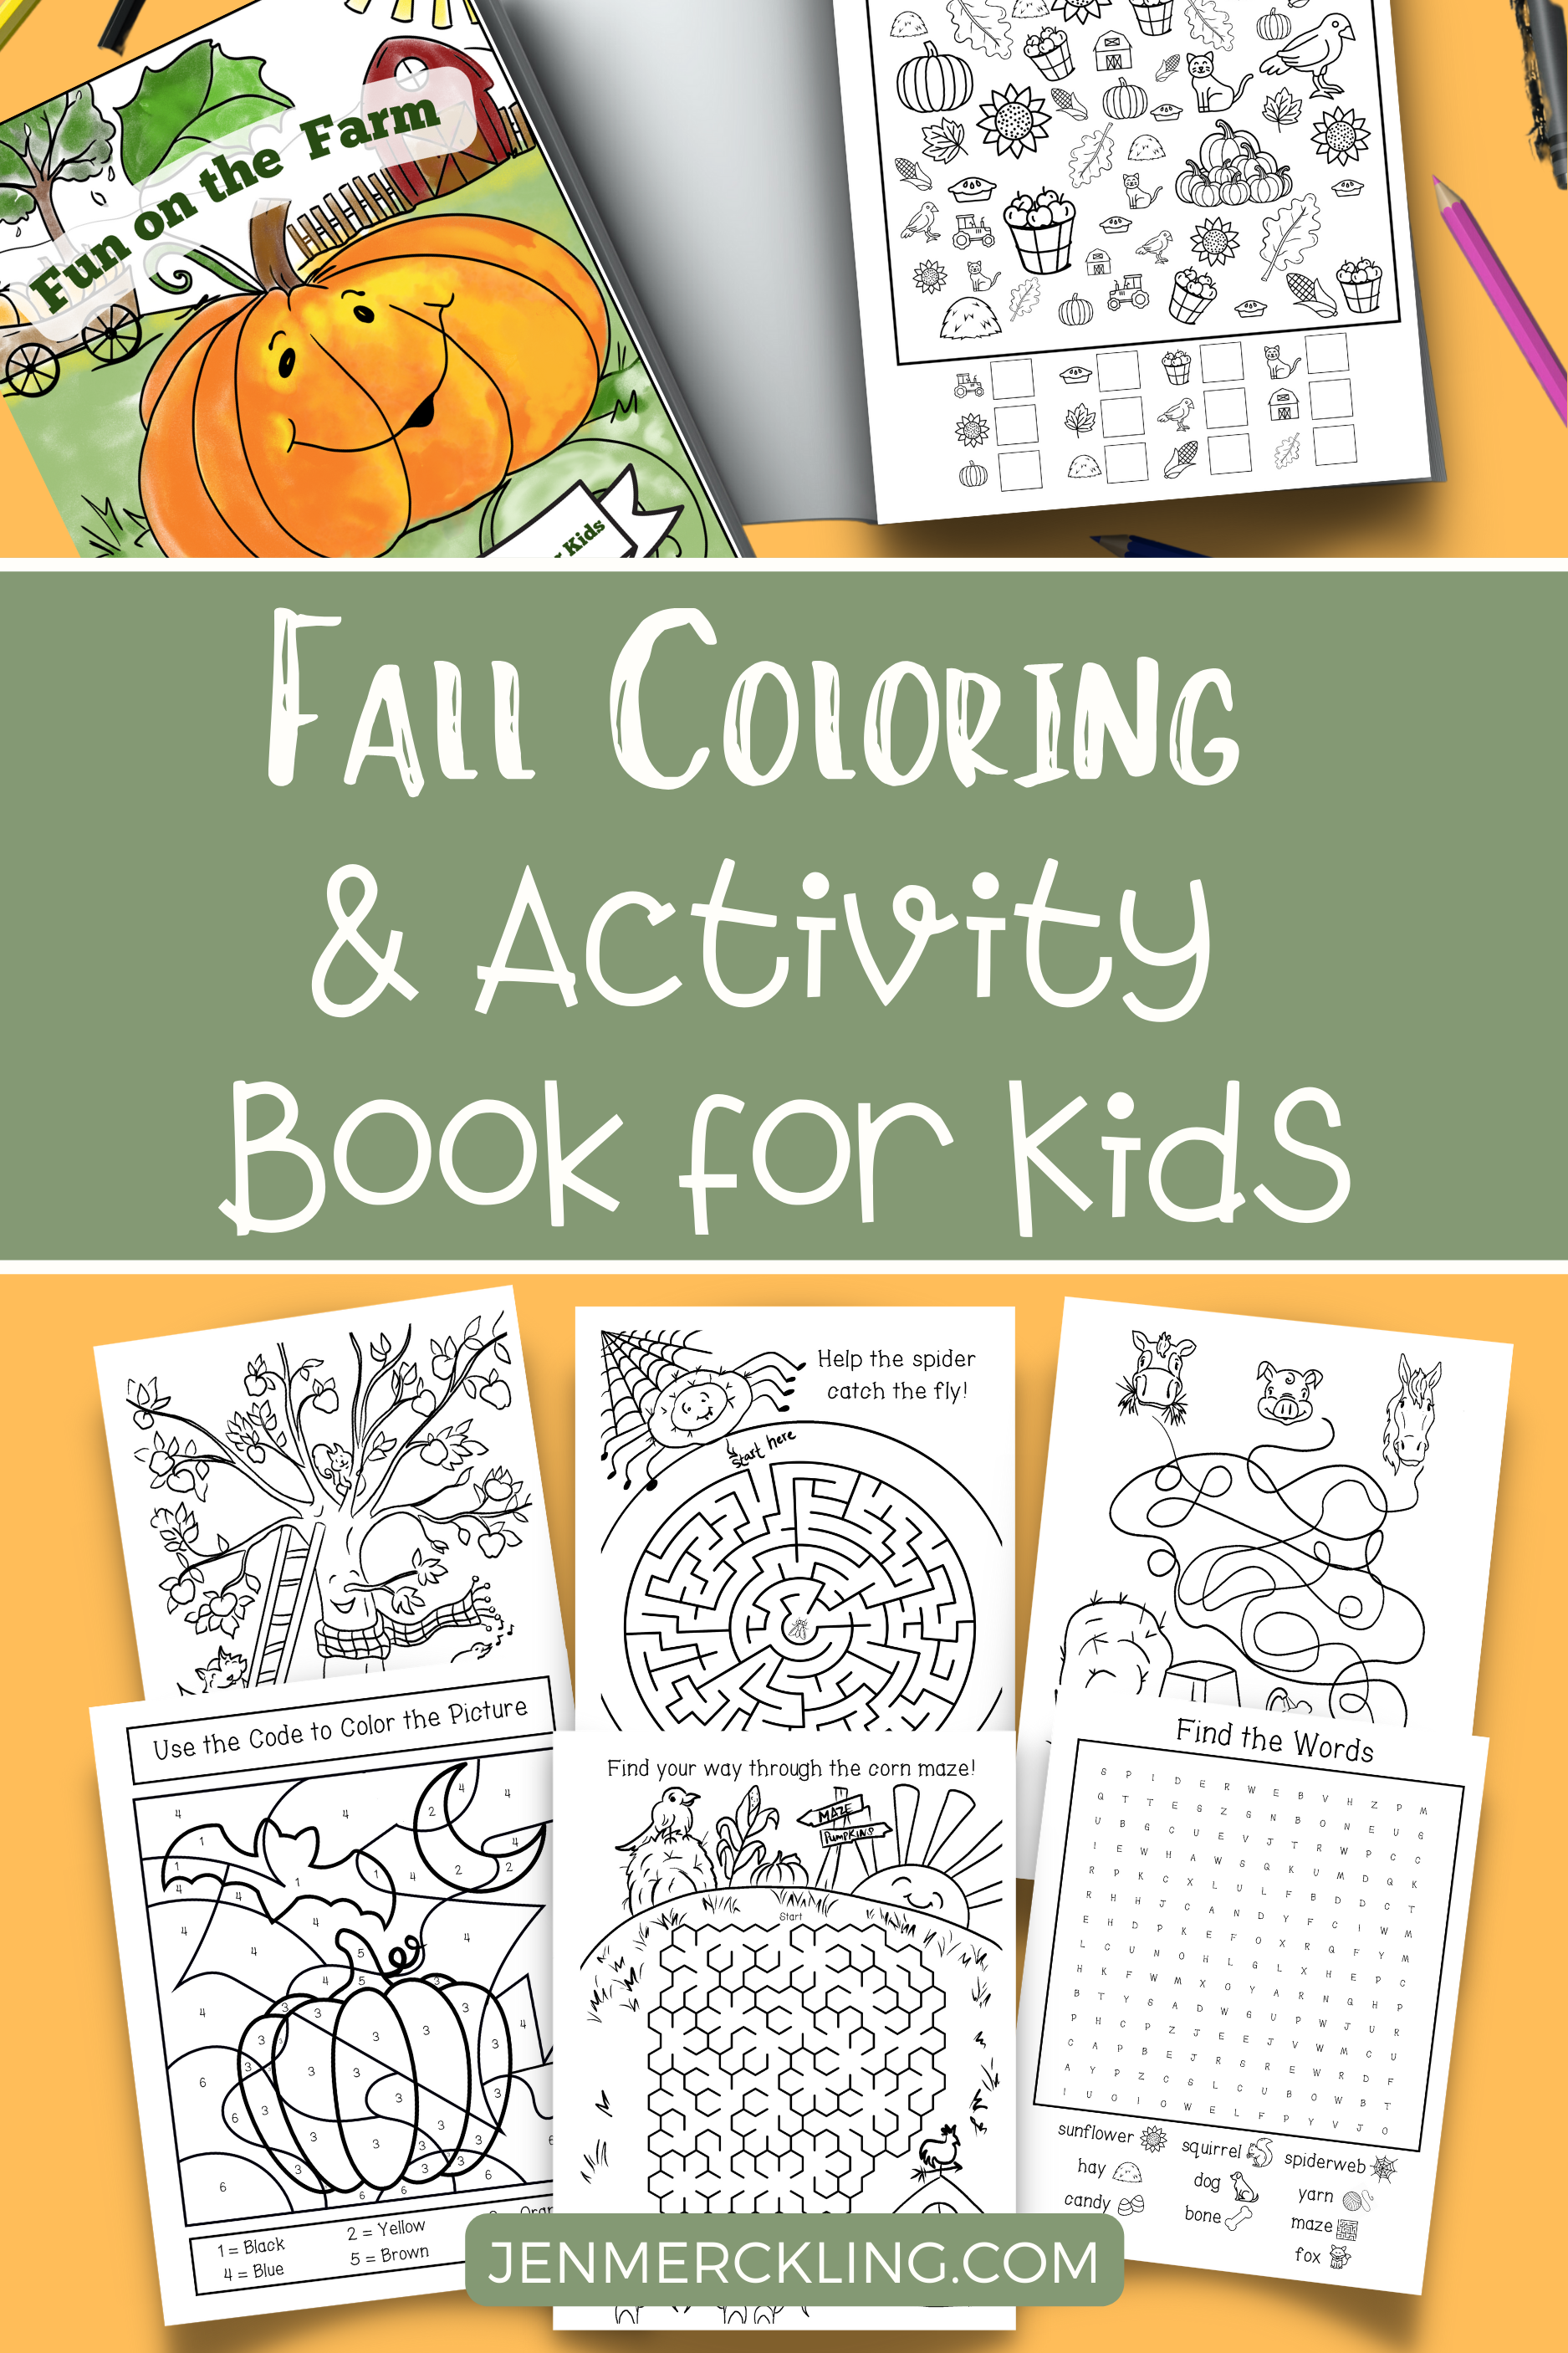 interior images and cover of fall coloring and activity book for kids